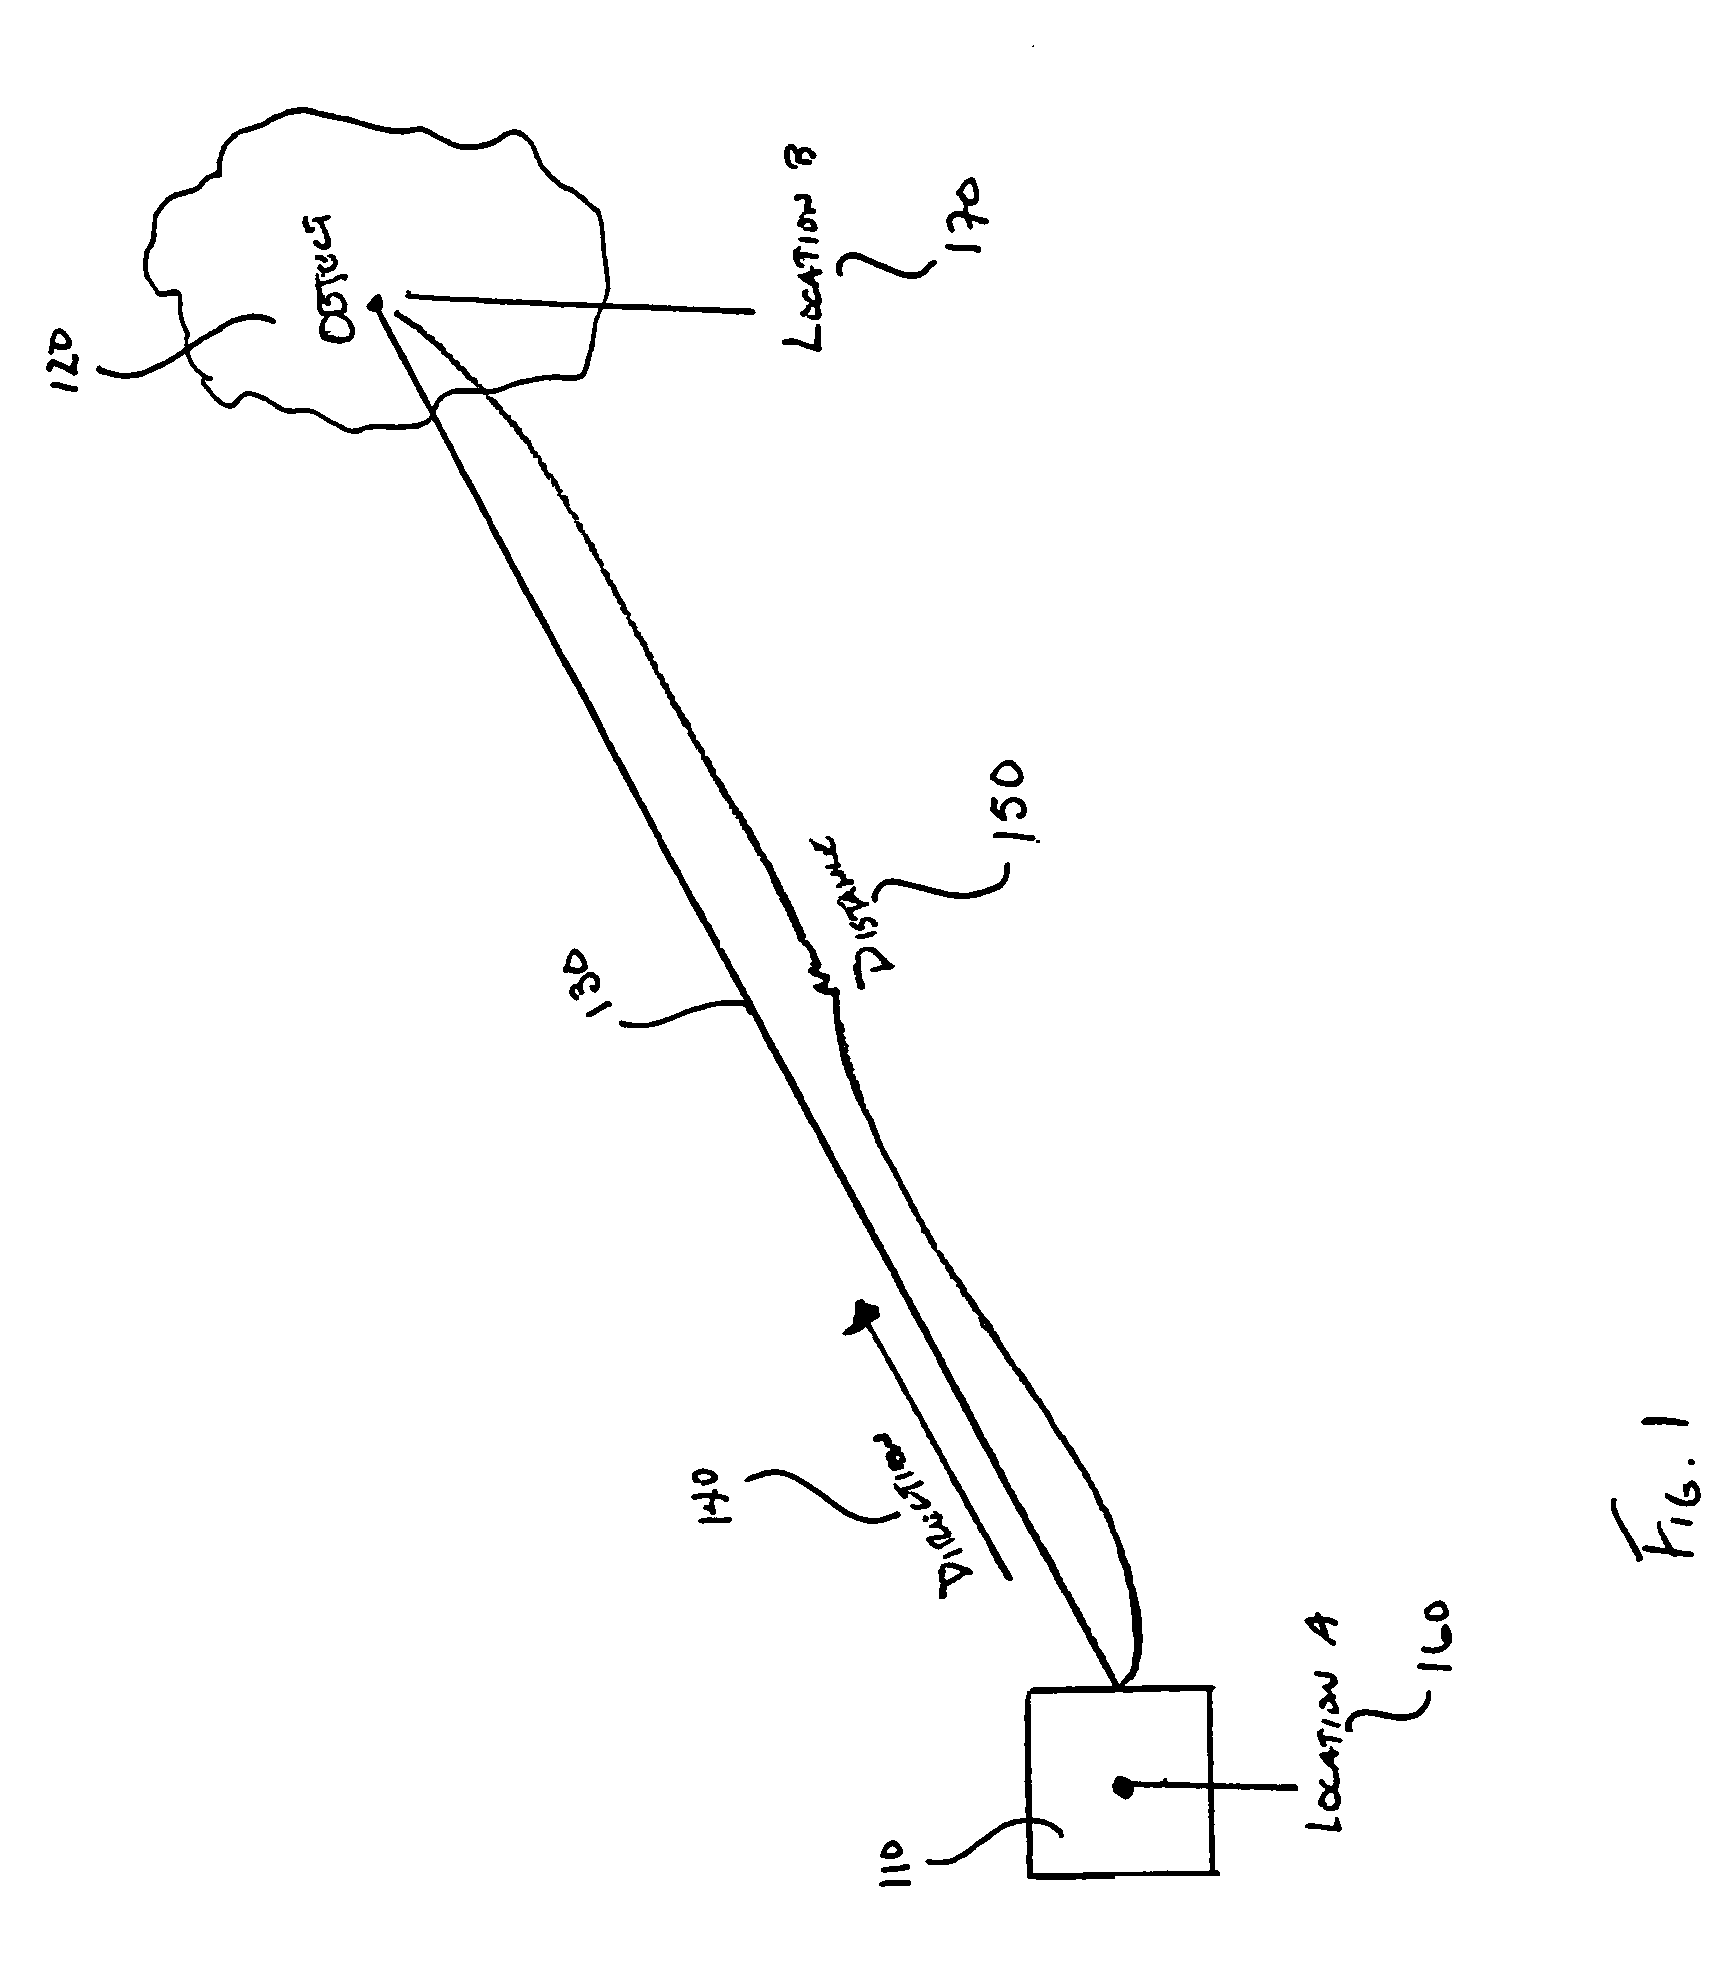 Systems and methods for location based image telegraphy